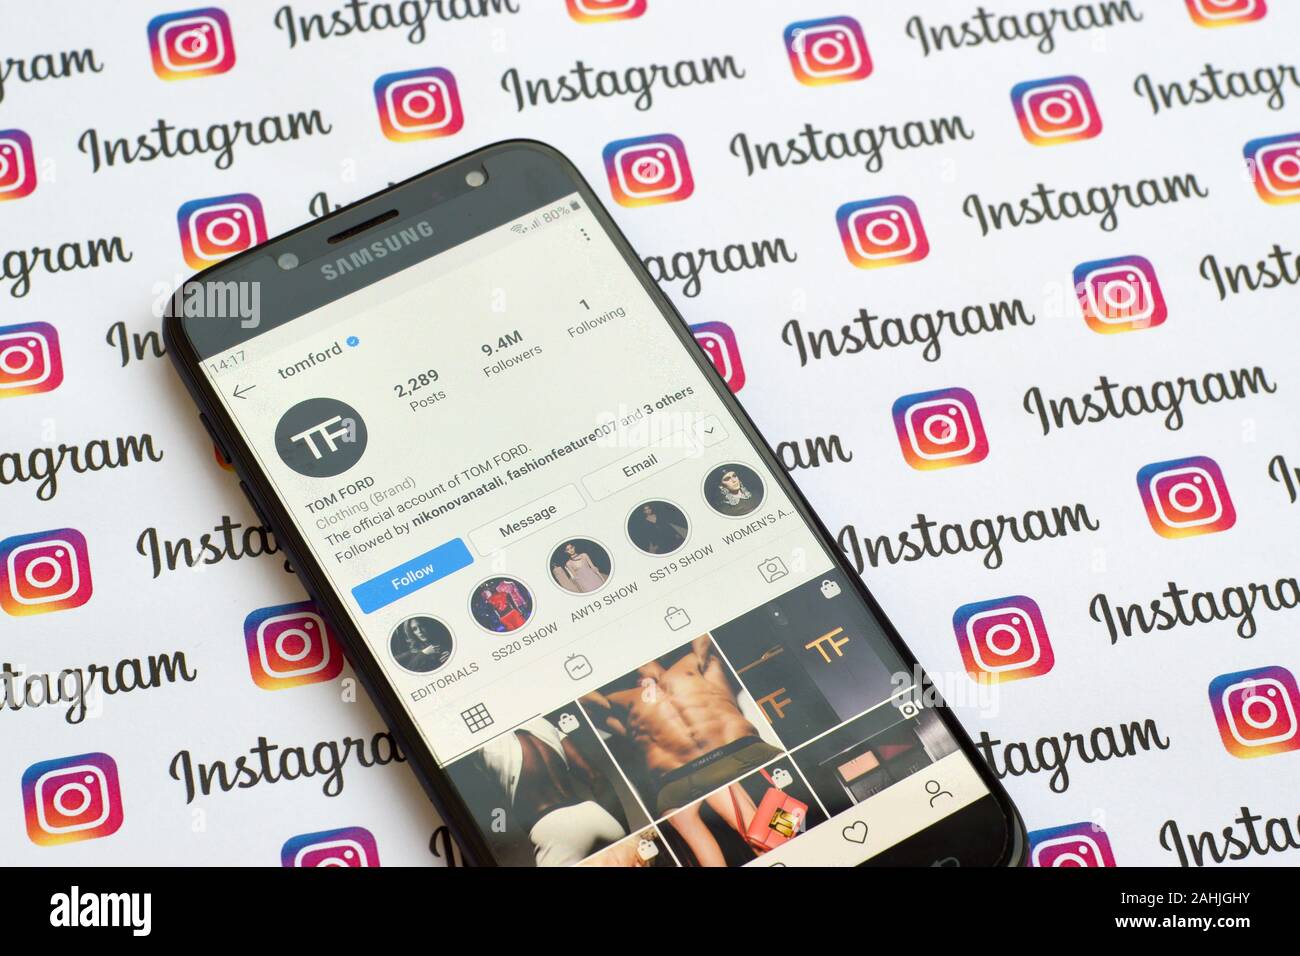 NY, USA - DECEMBER 4, 2019: Tom Ford official instagram account on  smartphone screen on paper instagram banner Stock Photo - Alamy